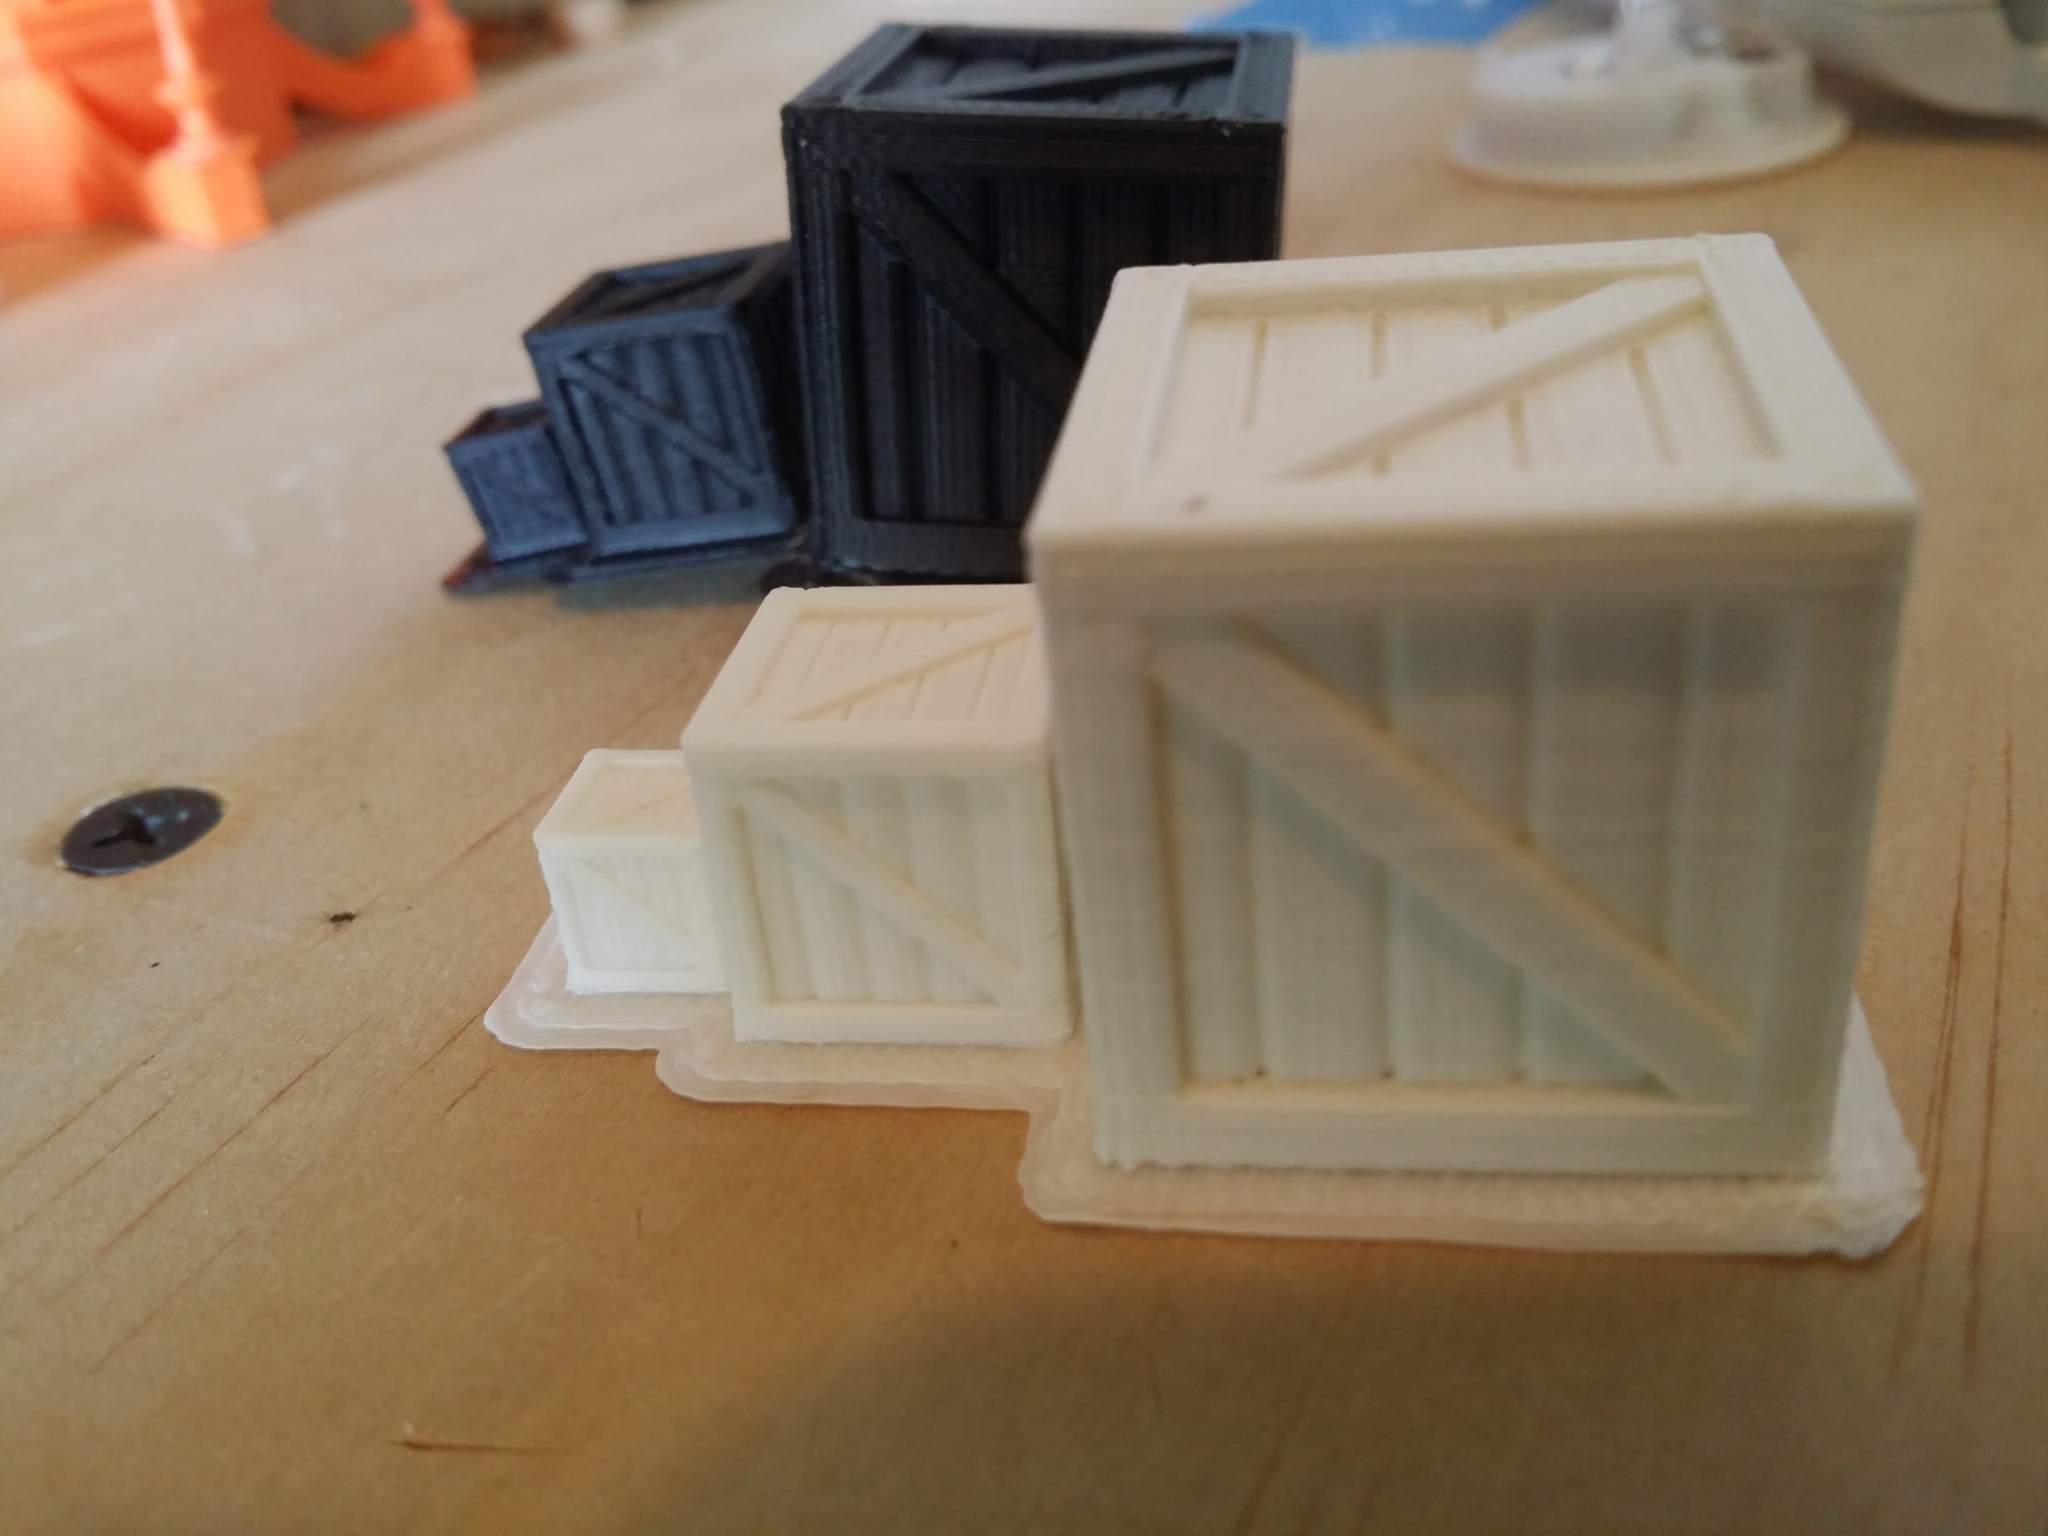 Design and Print Your Own Model Railroad 3D Printing Industry